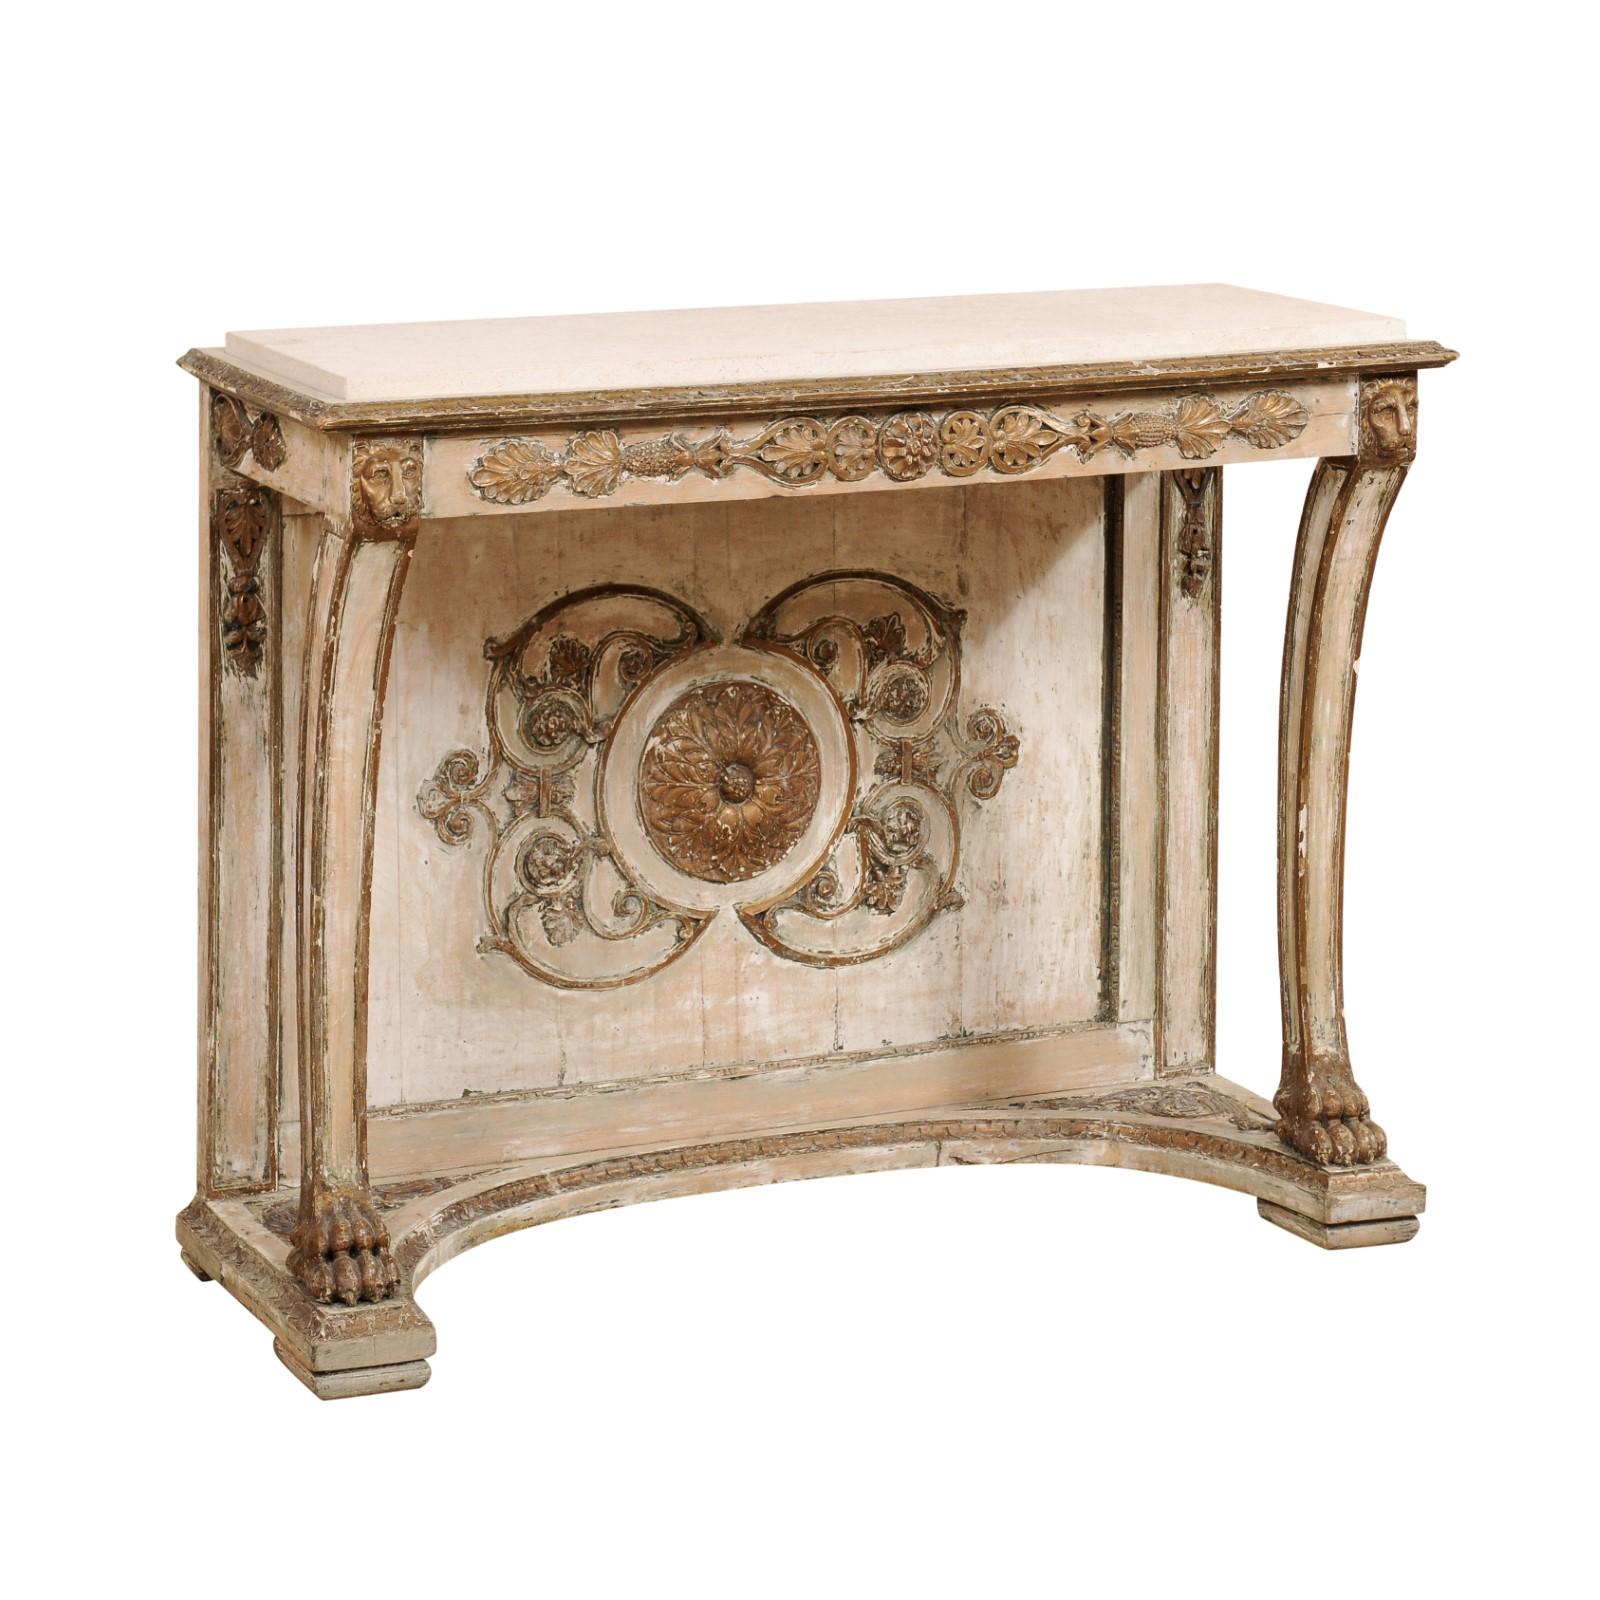 Italian Neoclassical Console Table with Parcel Gilt and Stone Top, circa 1830